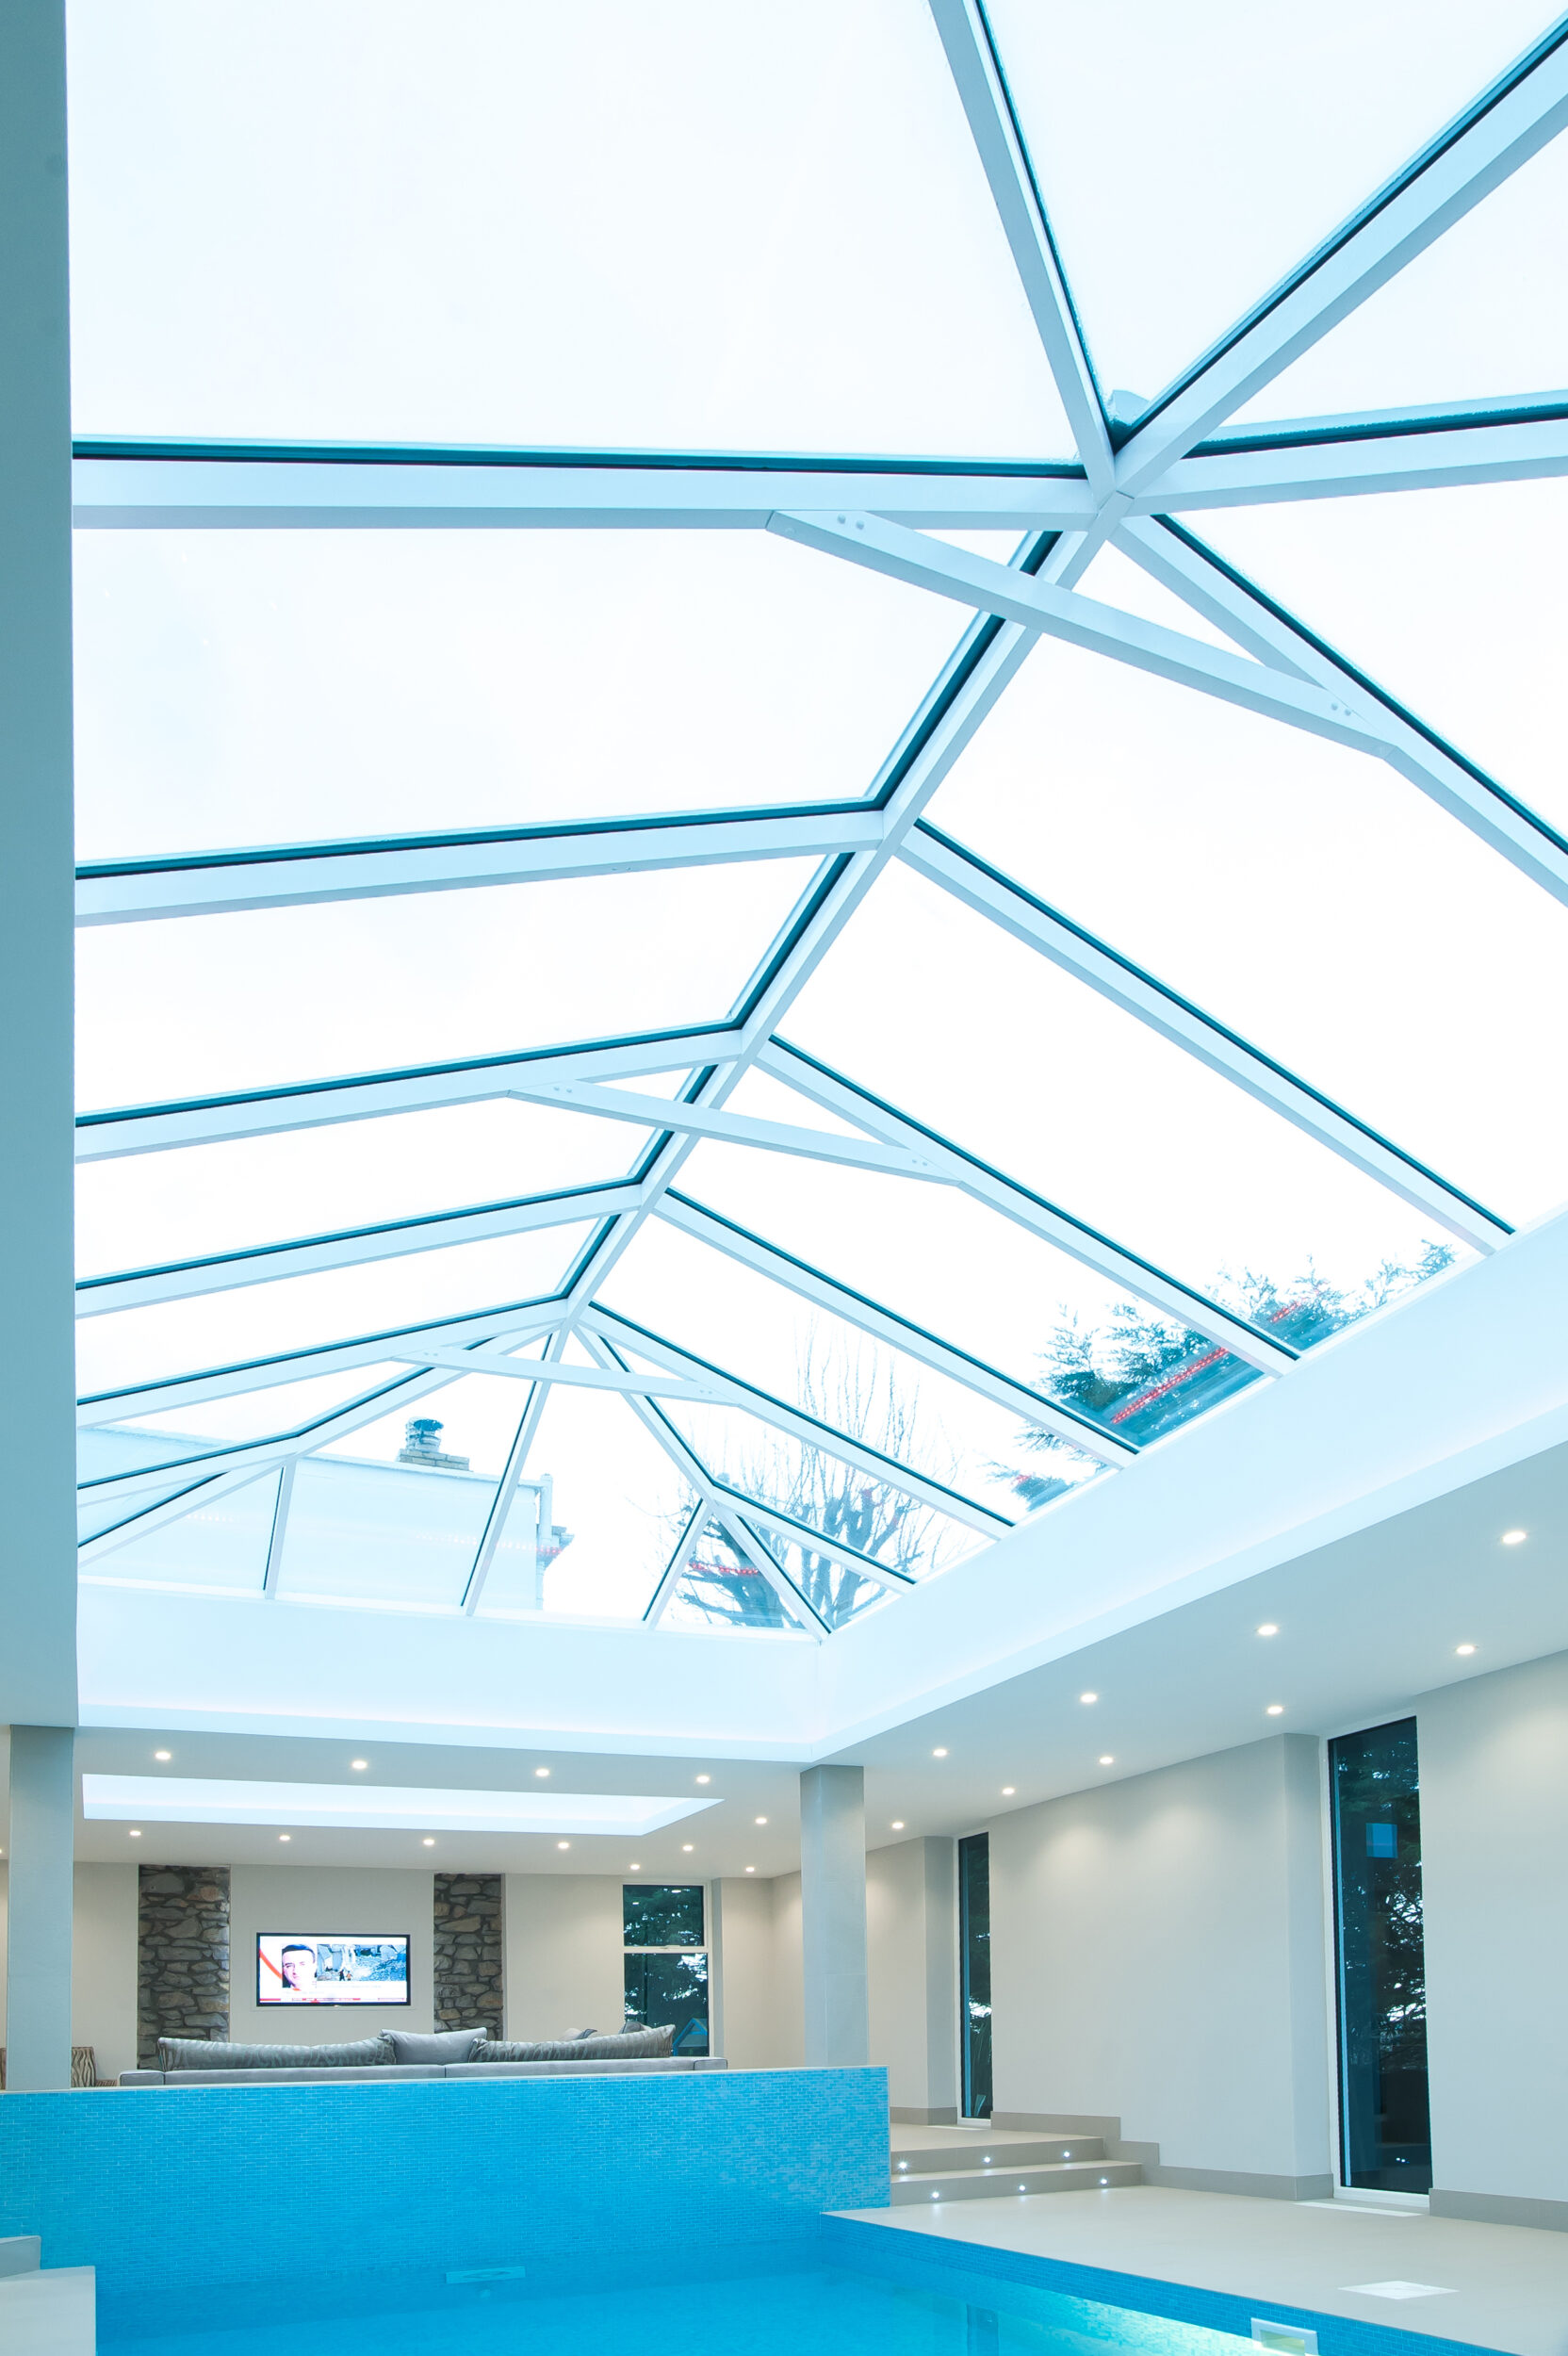 Glass house trend surging, says natural light specialist LB Roof Windows